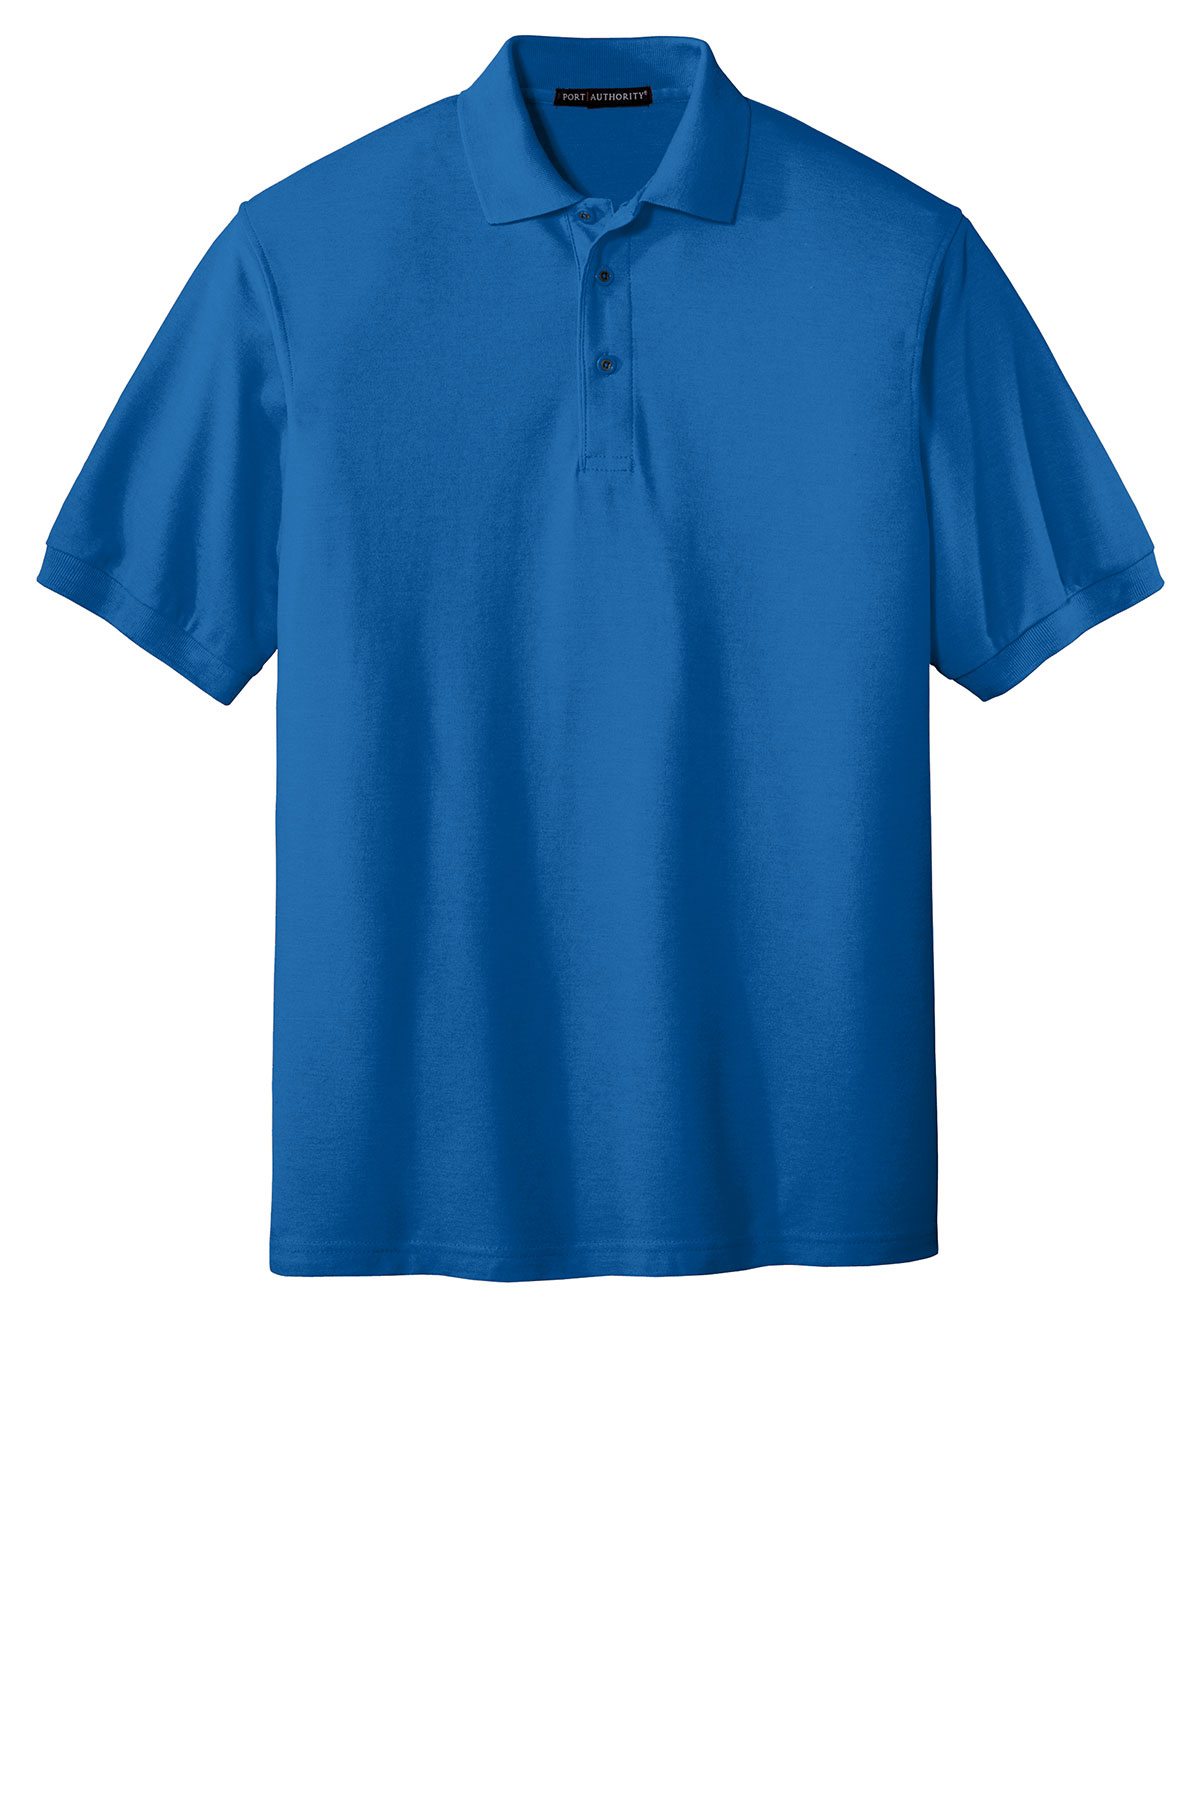 Port Authority Extended Size Silk Touch™ Polo | Product | SanMar